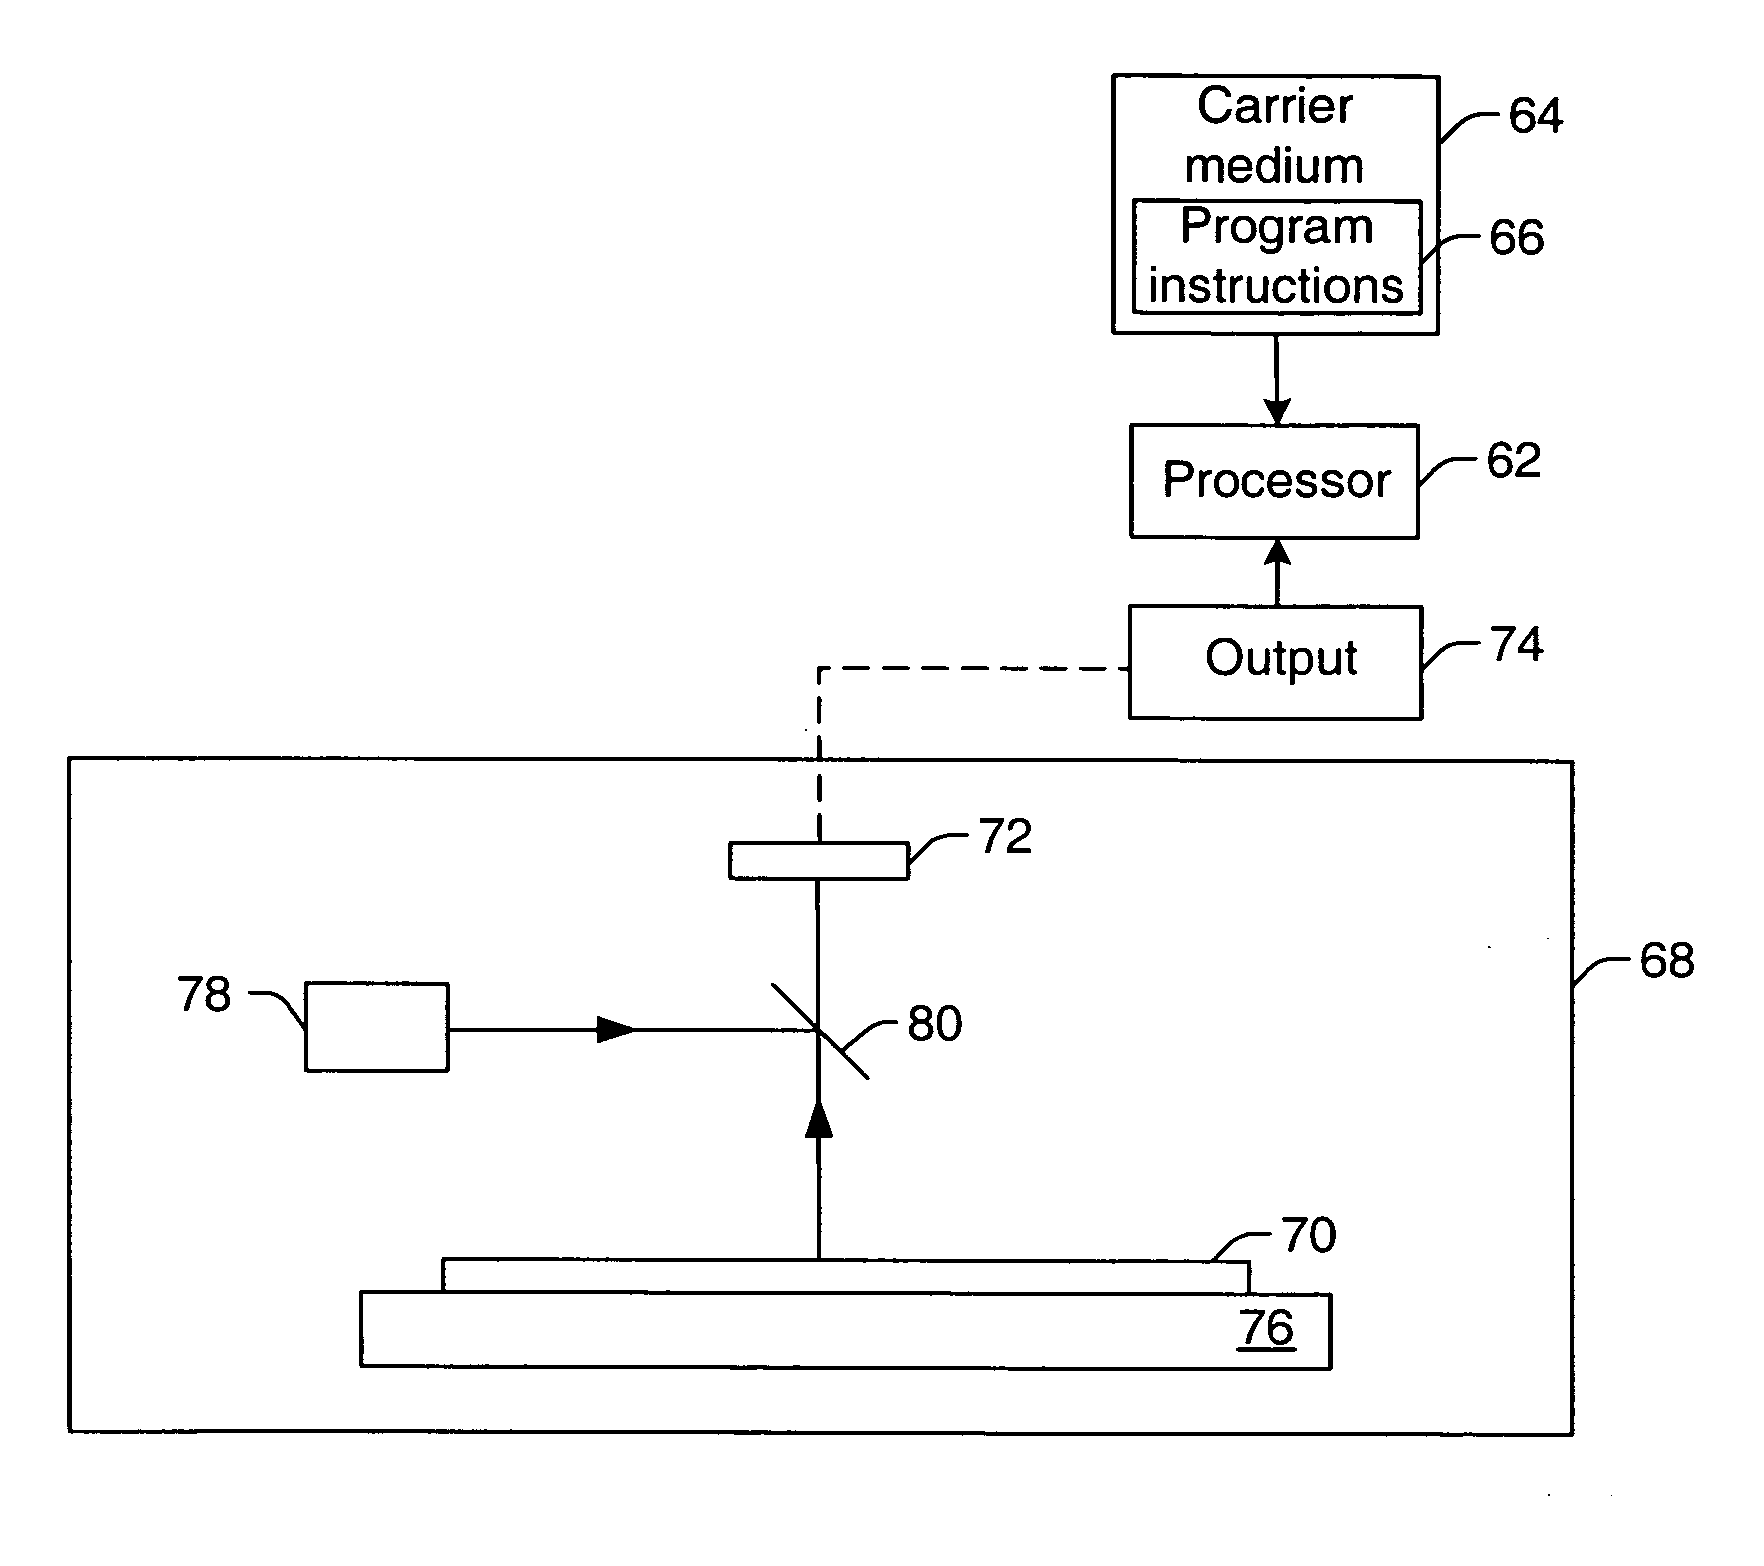 Computer-implemented methods for detecting and/or sorting defects in a design pattern of a reticle